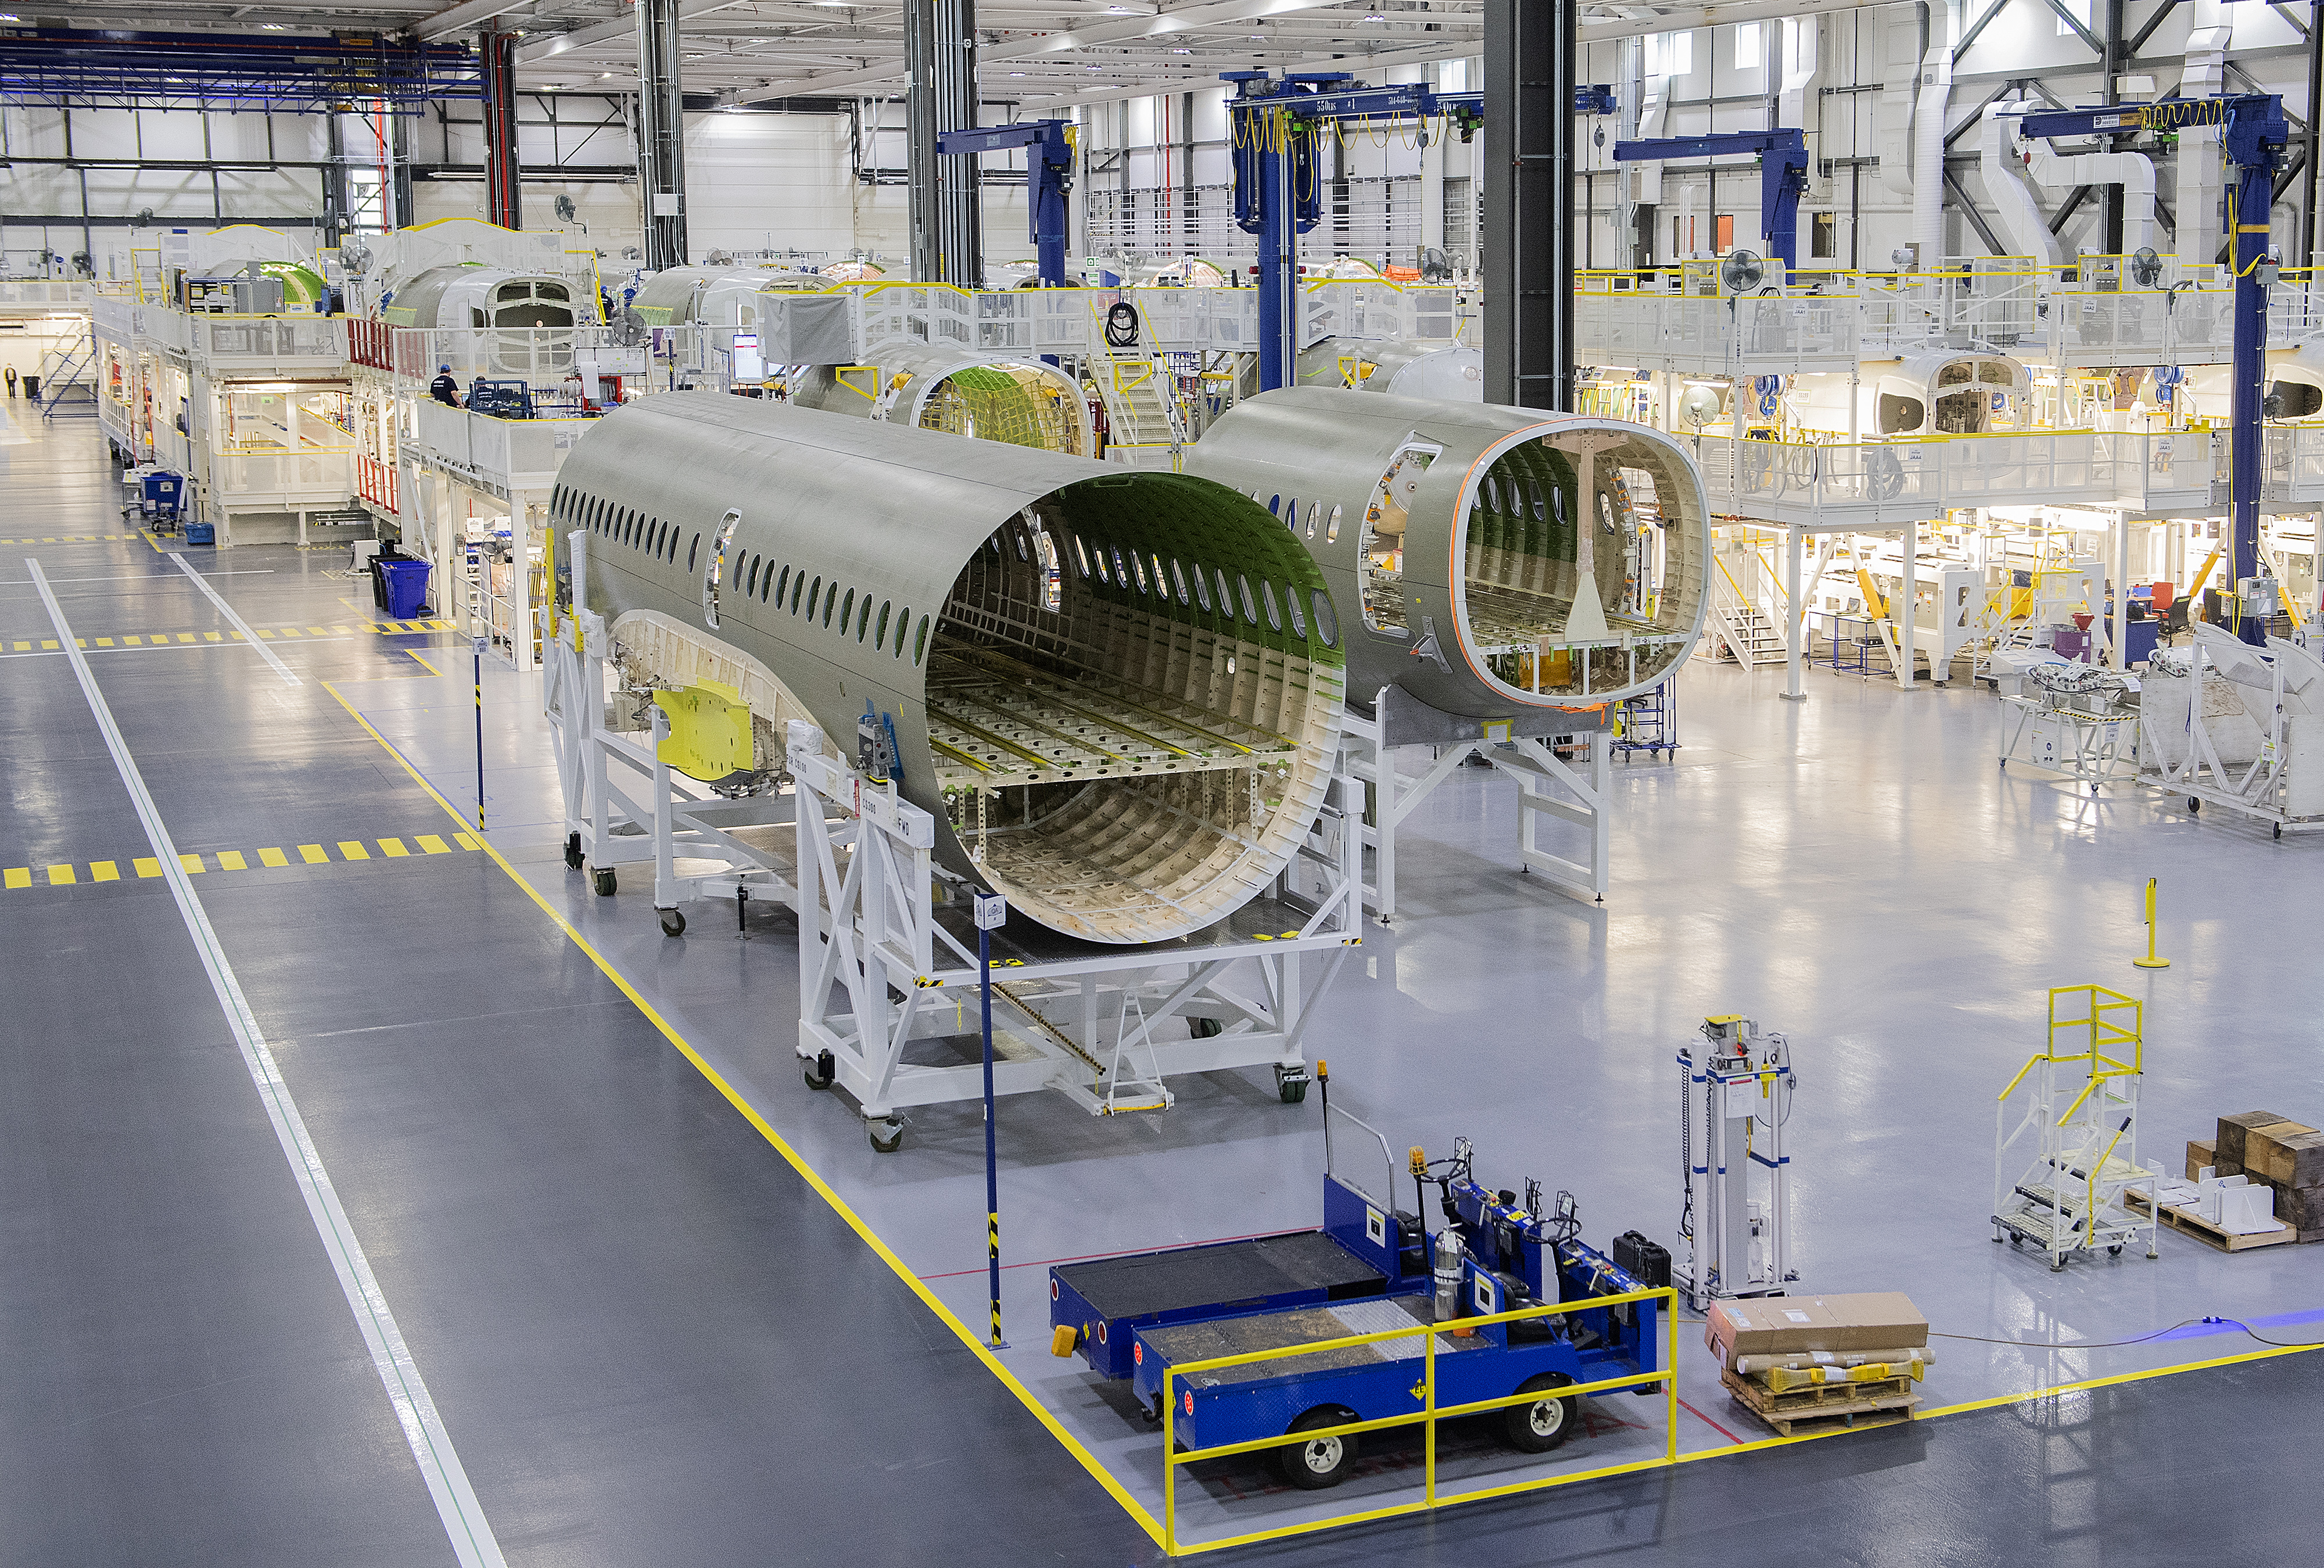 An Airbus manufacturing facility